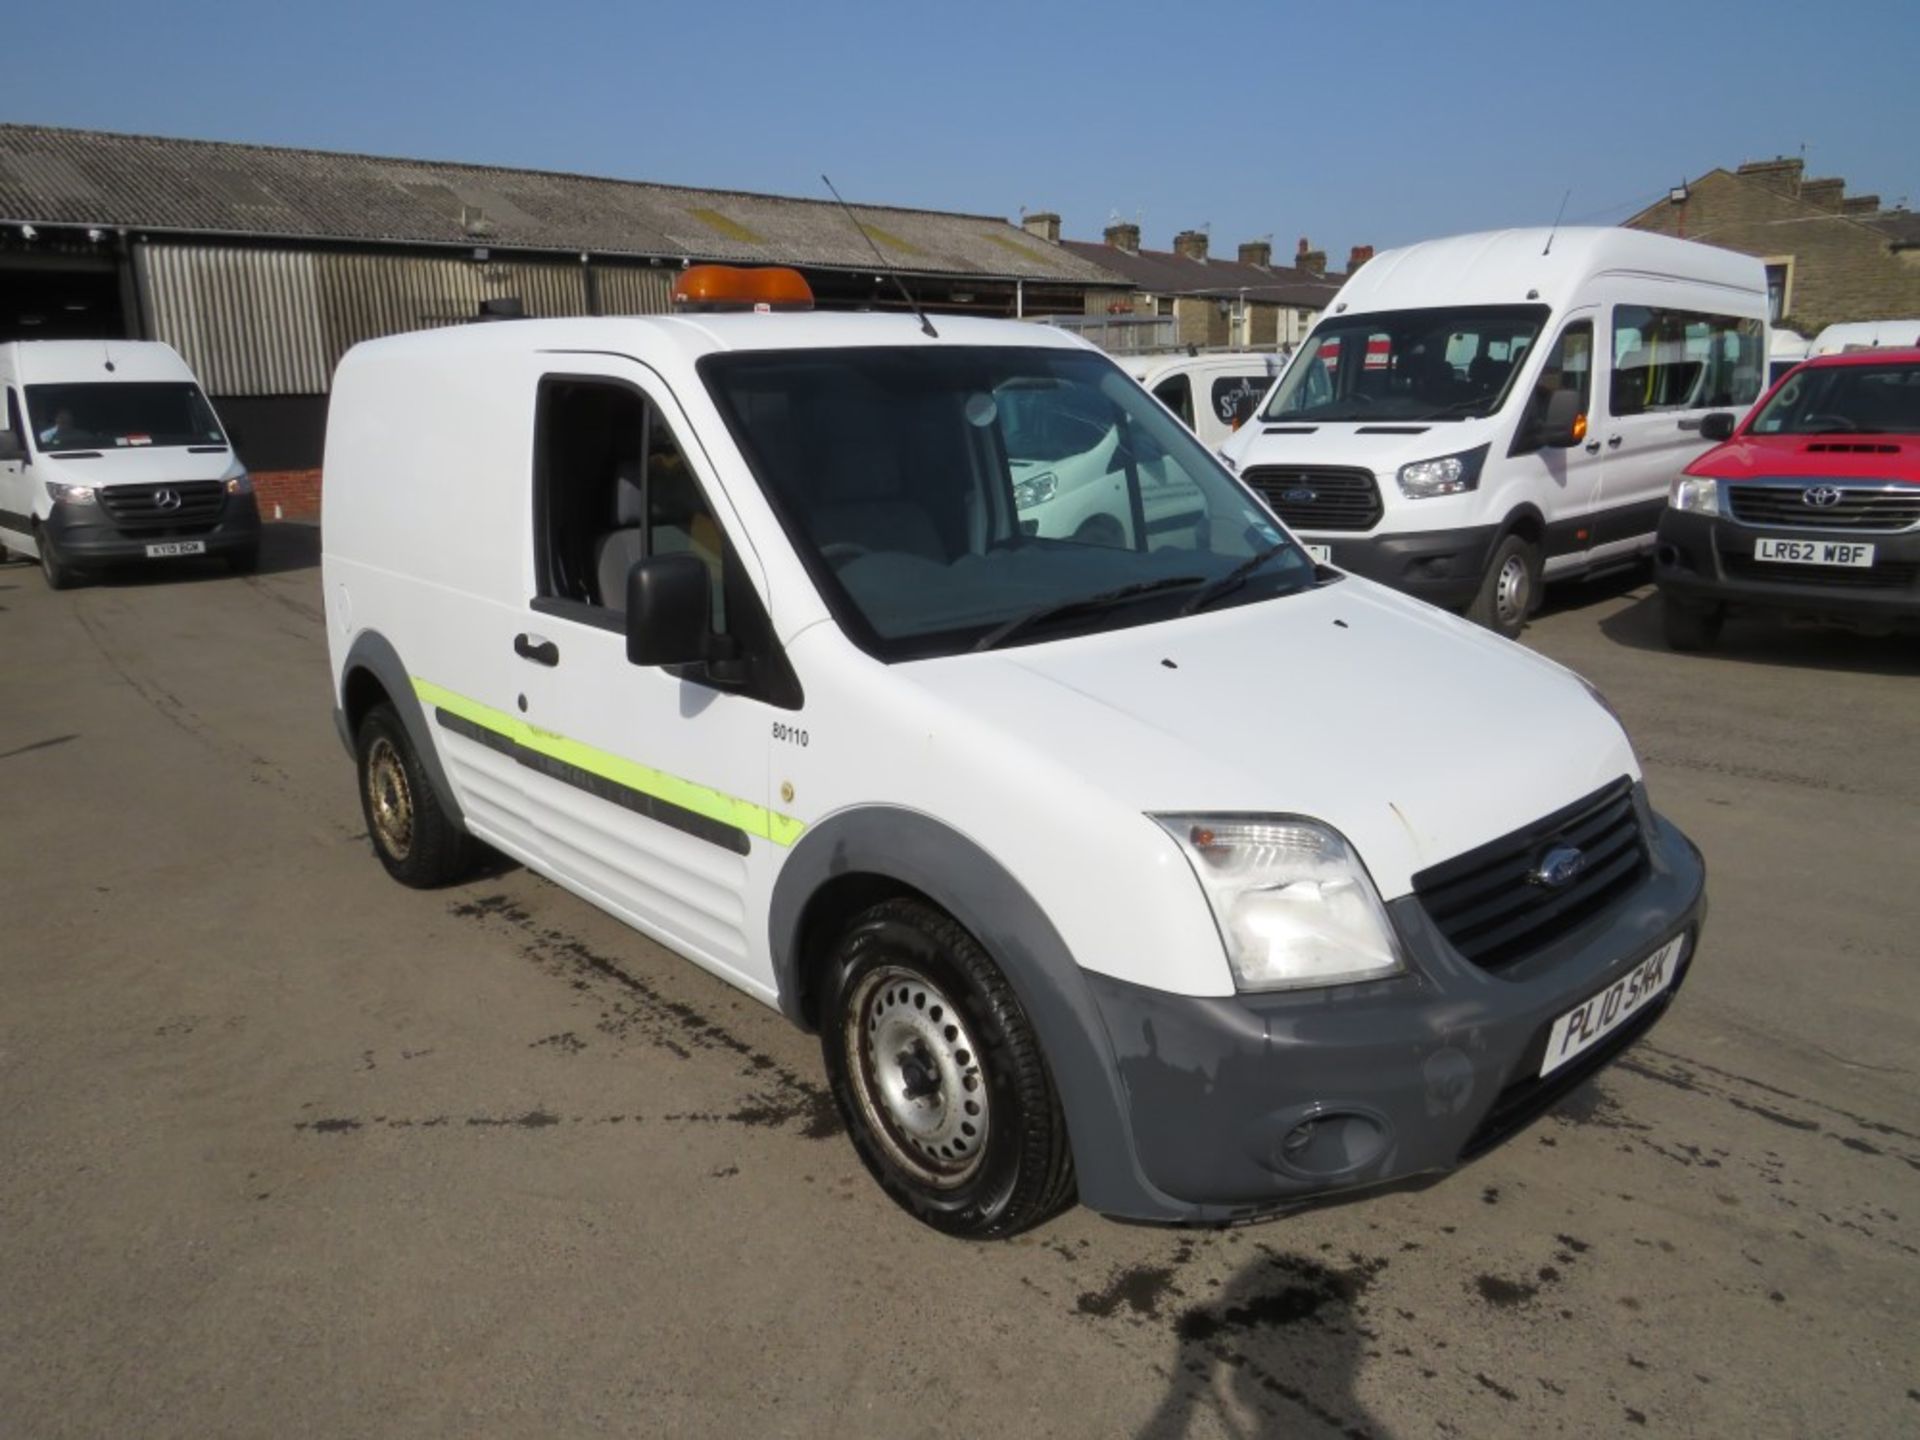 10 reg FORD TRANSIT CONNECT 75 T200 (DIRECT COUNCIL) 1ST REG 08/10, TEST 09/21, 104341M, V5 HERE,